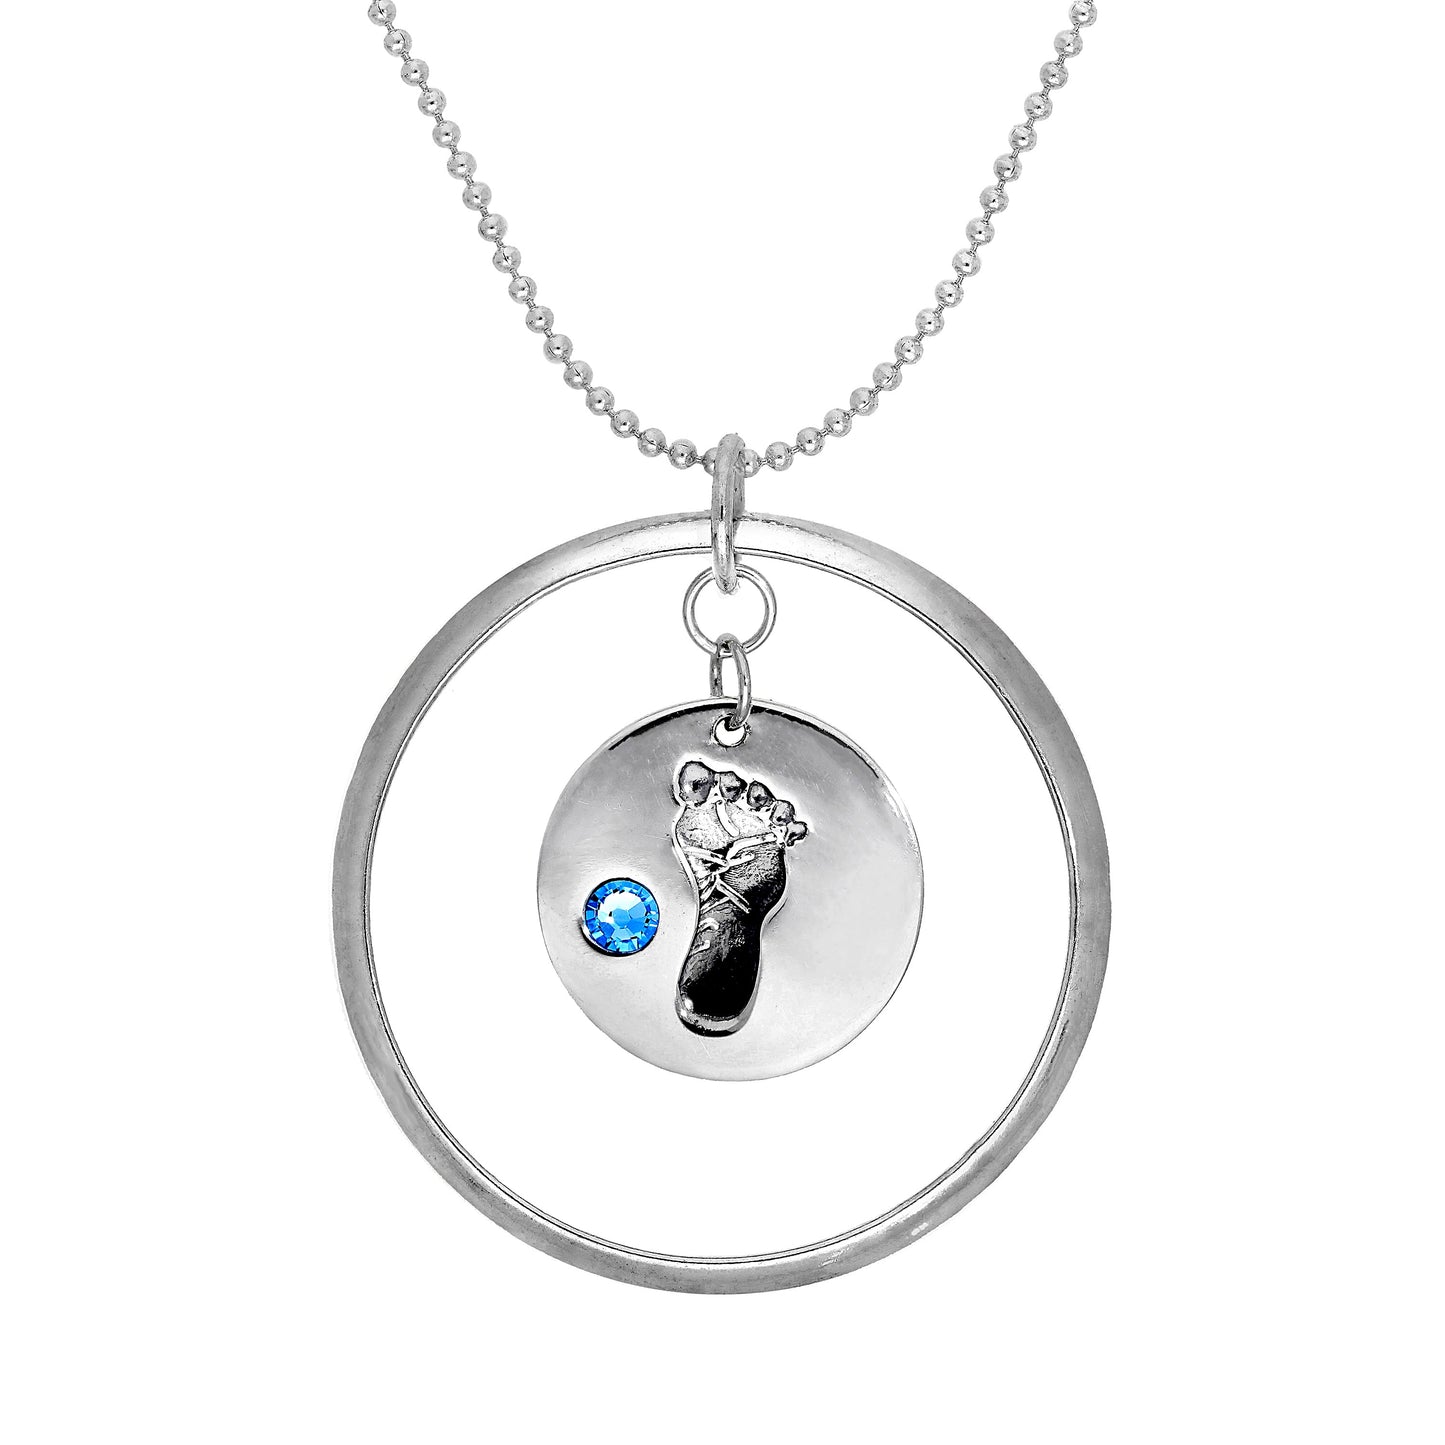 Sterling Silver Karma Moments Pendant with Birthstone Baby Footprint Charm on Bead Chain Necklace